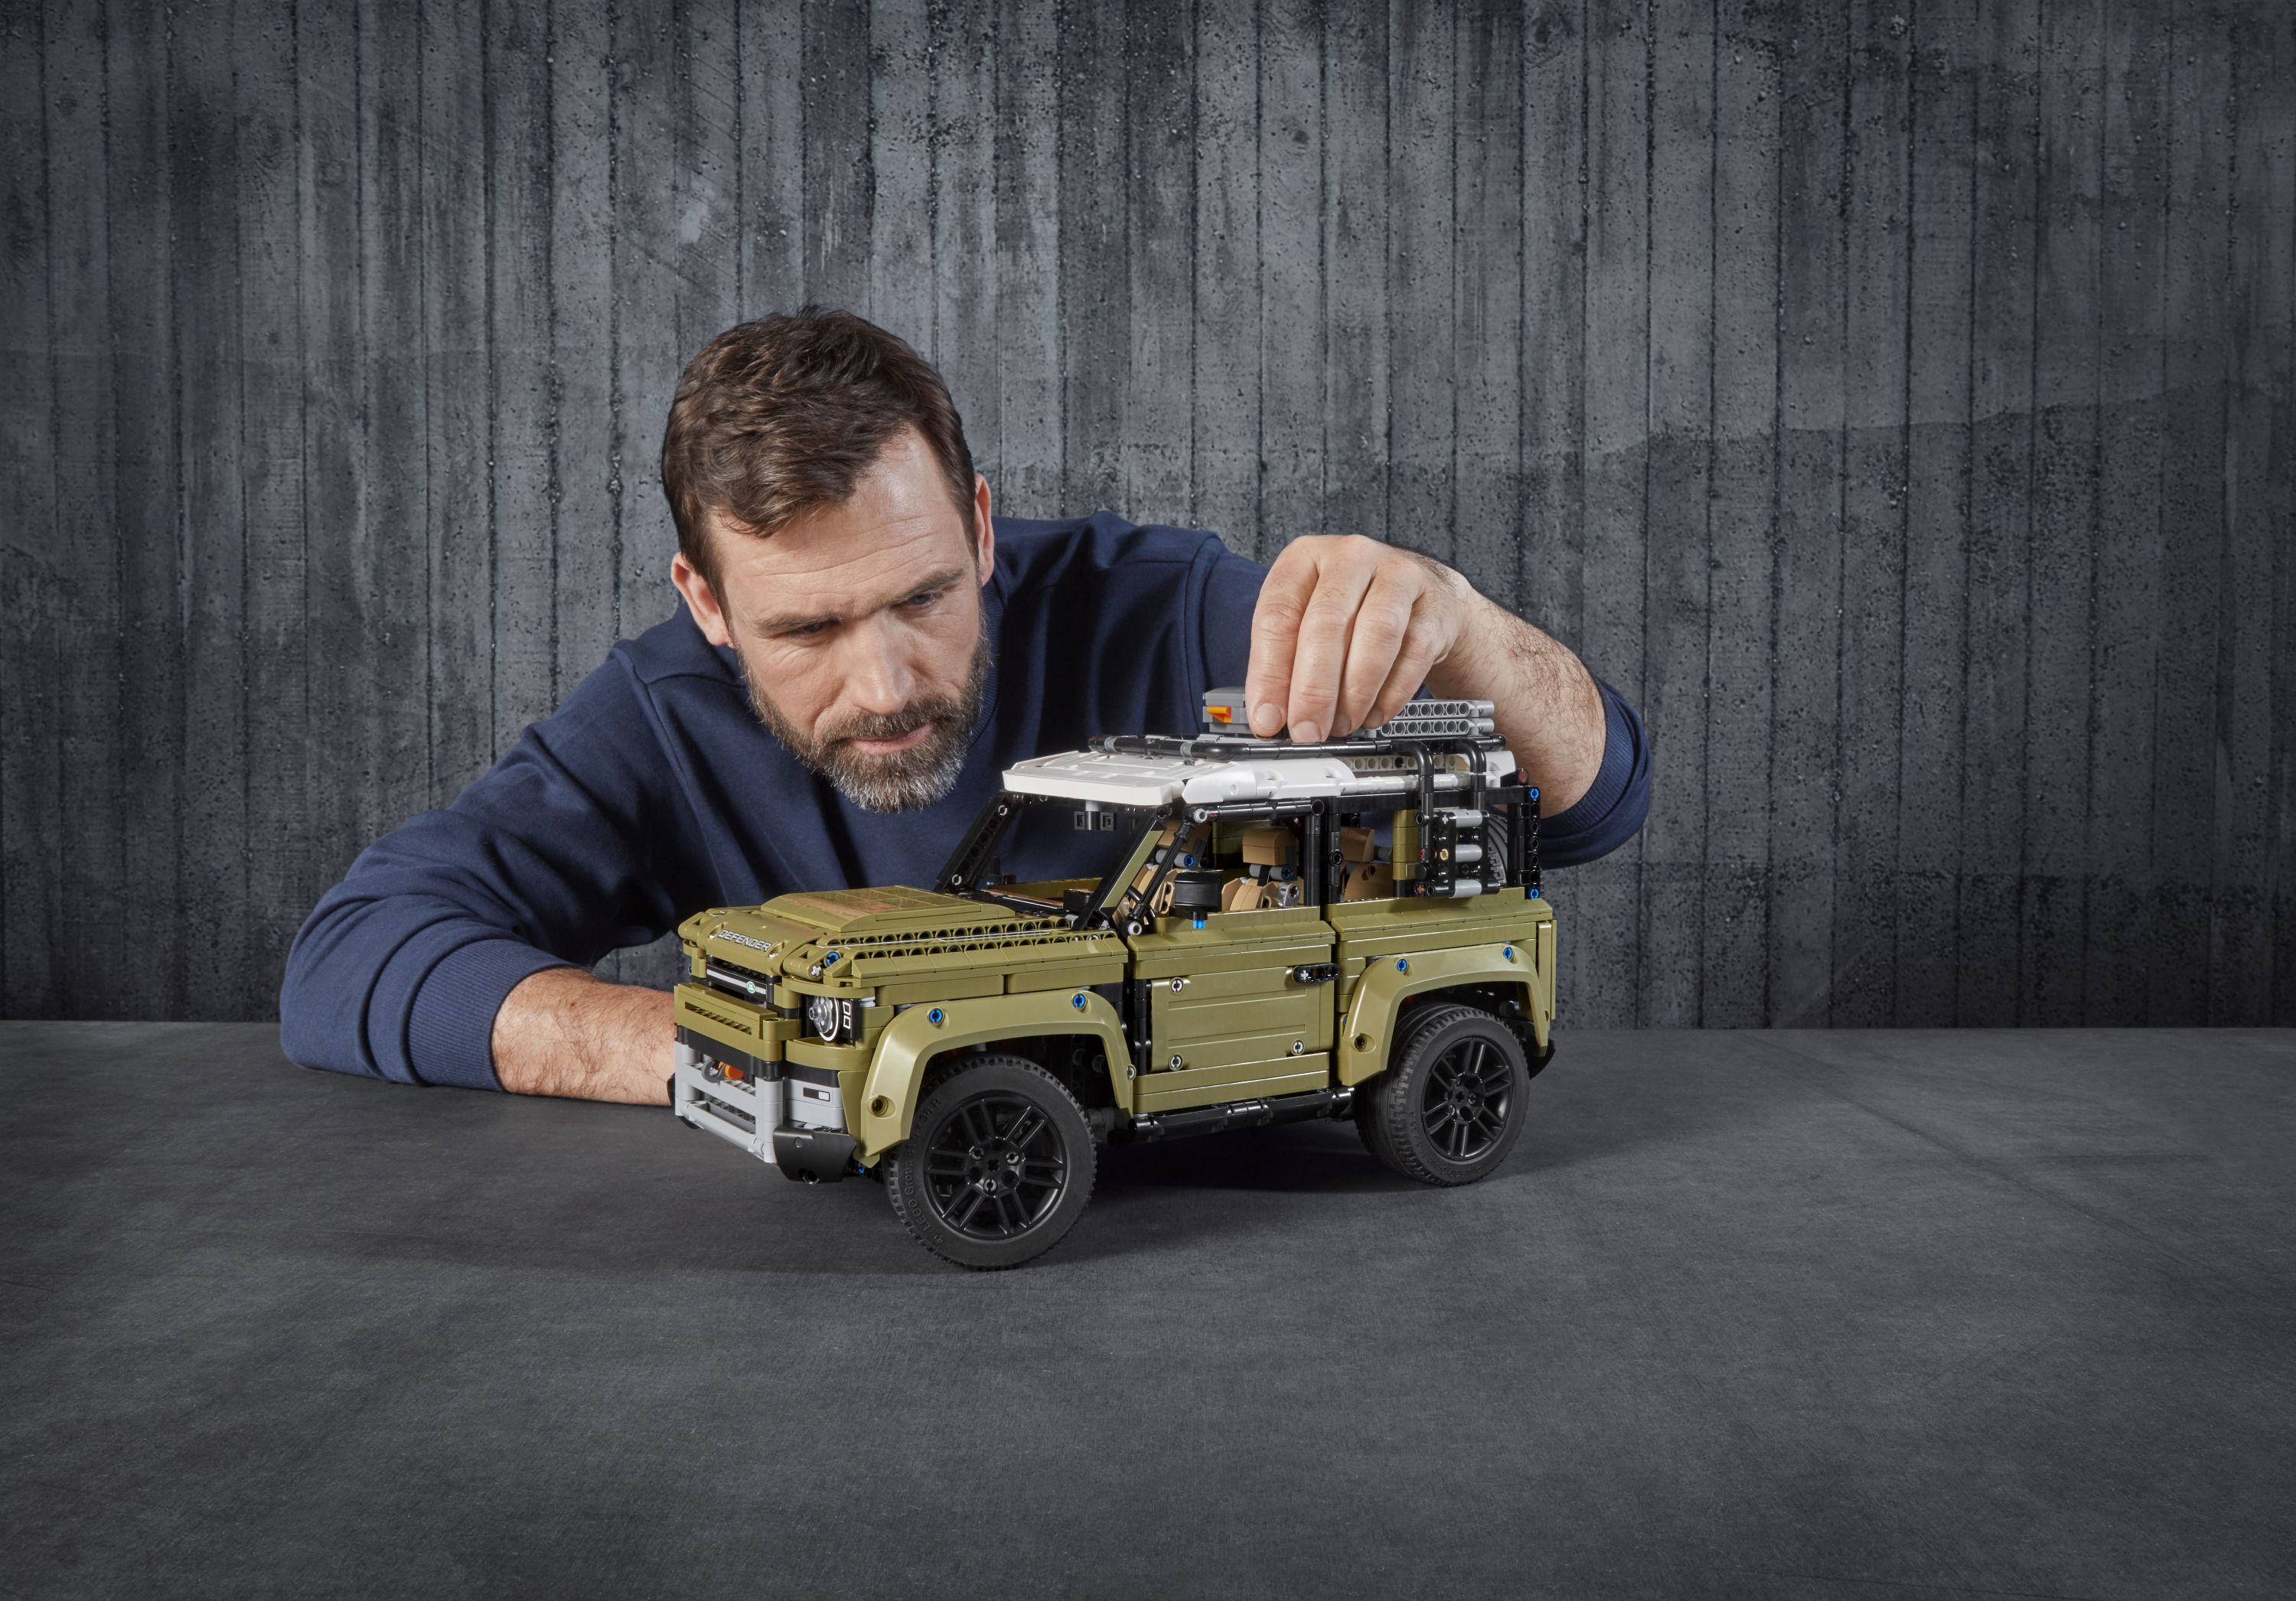 LEGO Technic Land Rover Defender 42110 - image 4 of 7